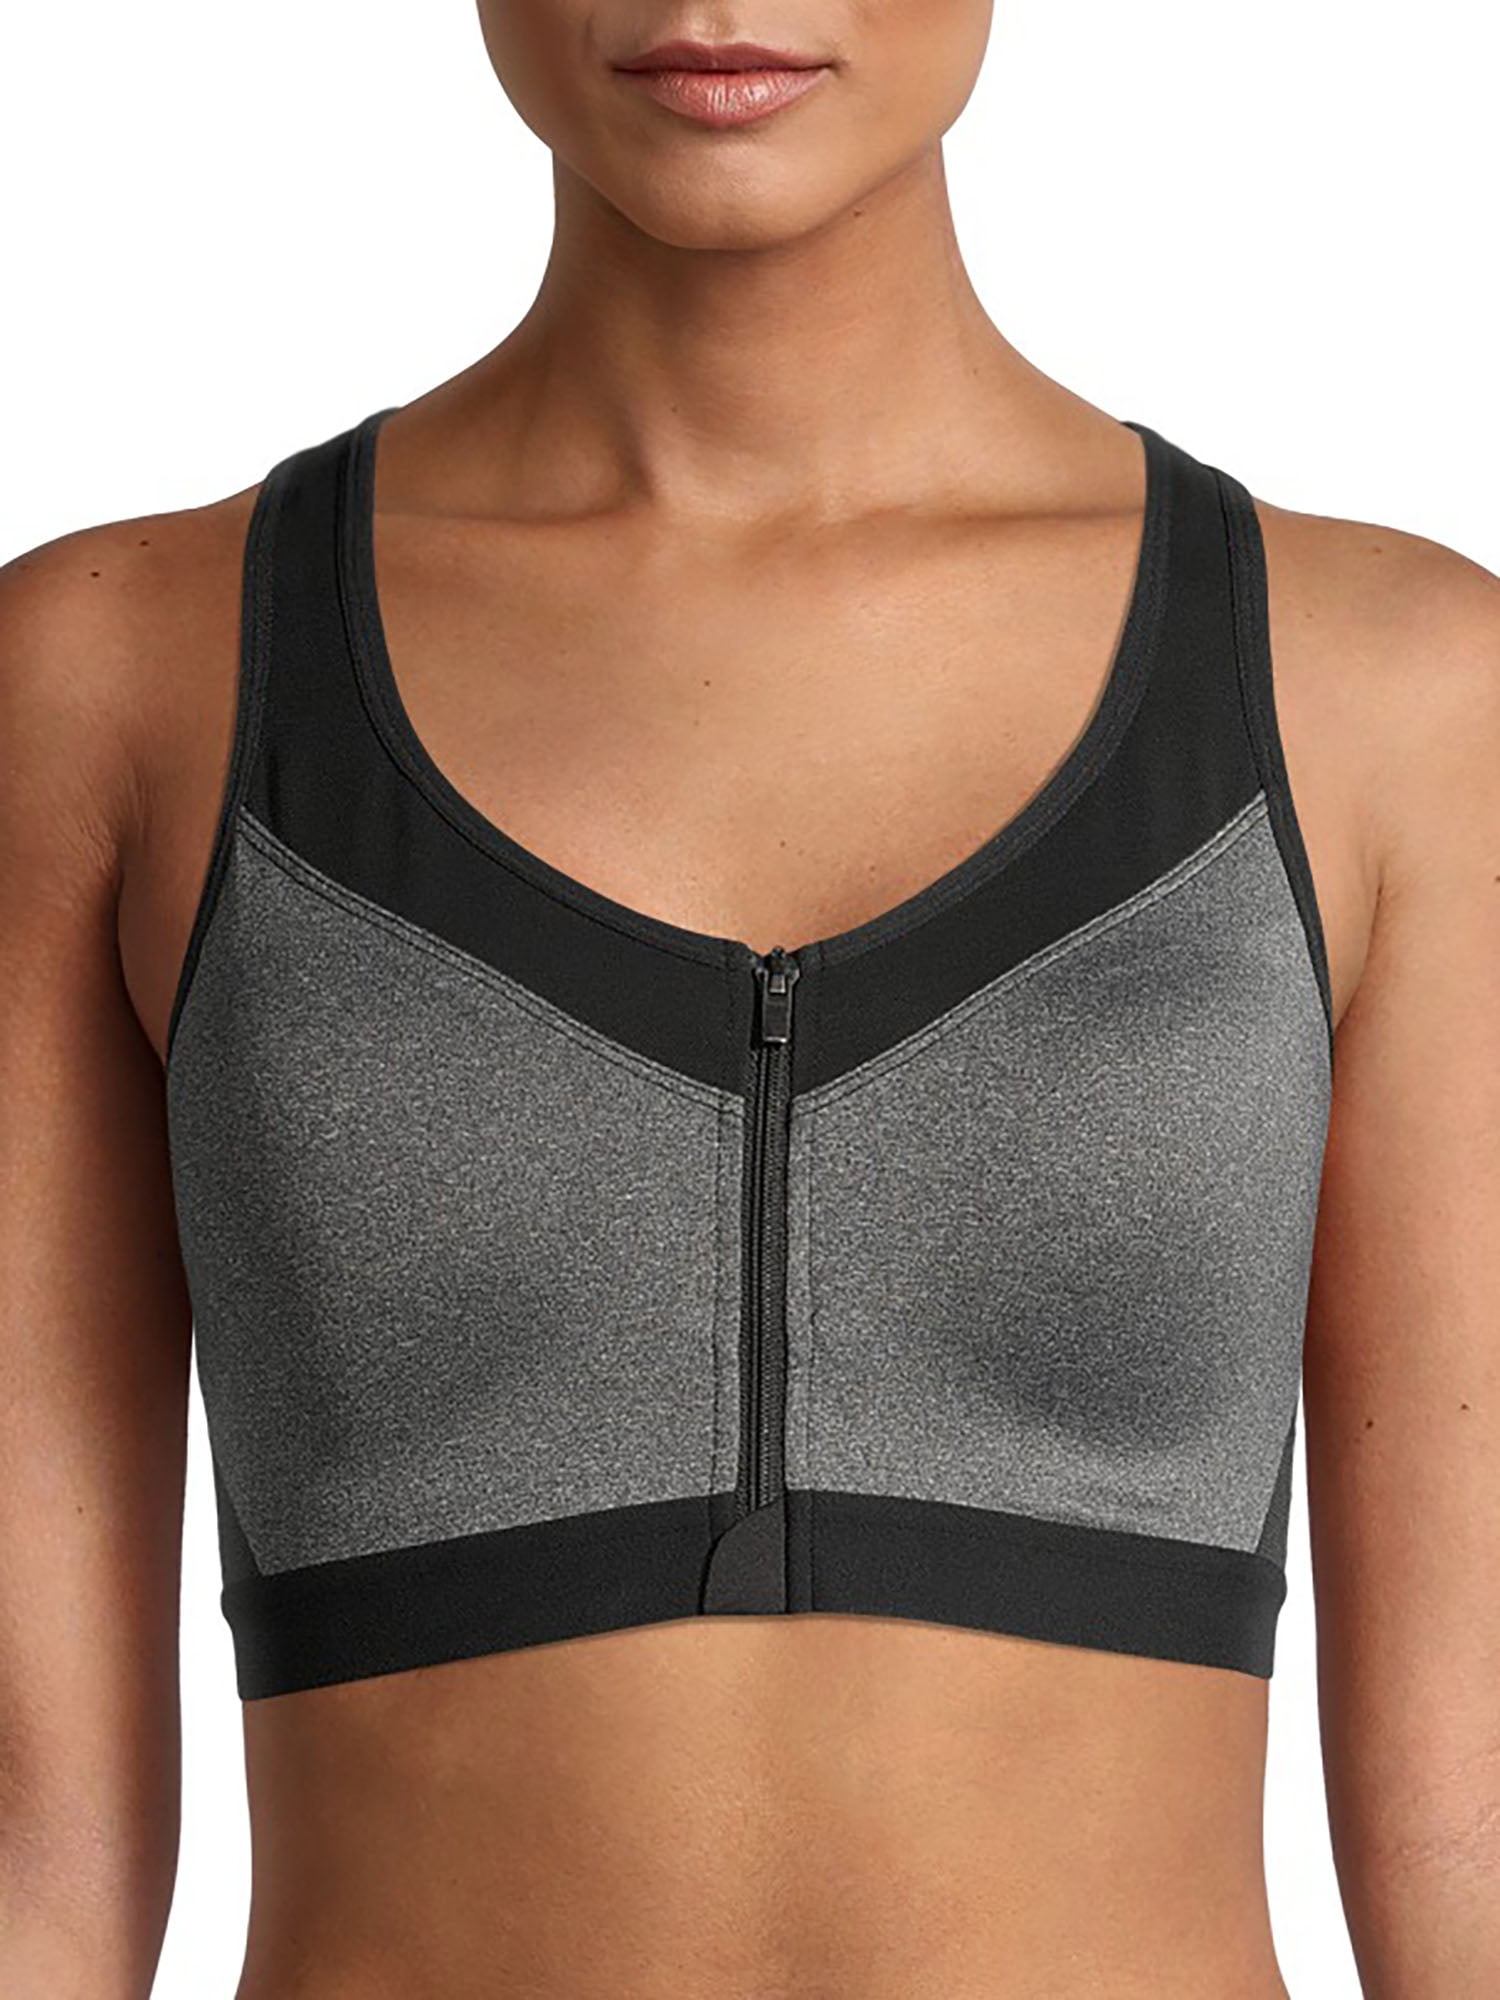 Womens Front Zip Sports Bra High Impact Push Up Wireless Padded Vest br 